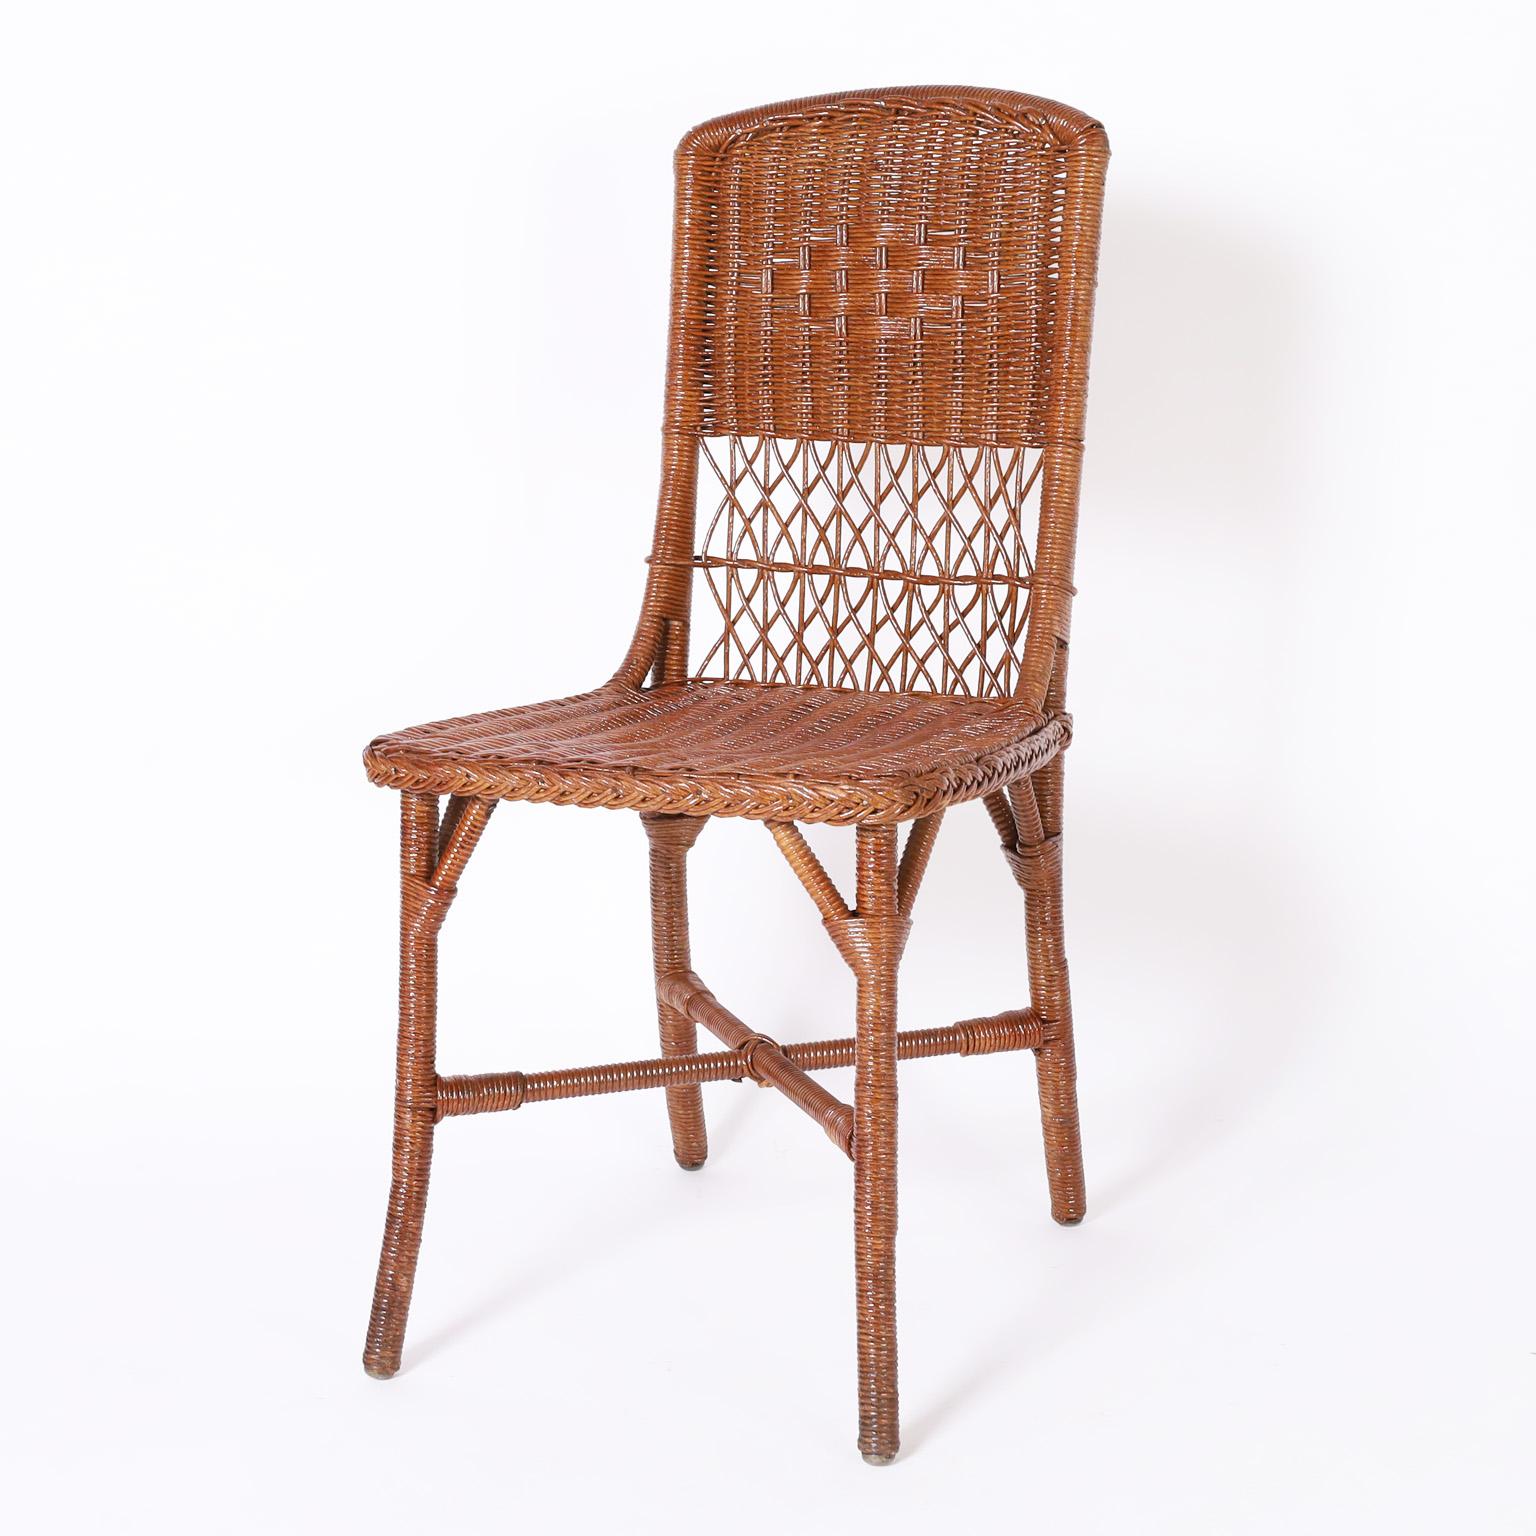 Standout set of twelve wicker side chairs in remarkable condition with multiple weaving techniques, crafted with brackets and cross stretchers for durability. Originally called fiber furniture in the 1937 catalog signed Sheboygan Furniture Co. on